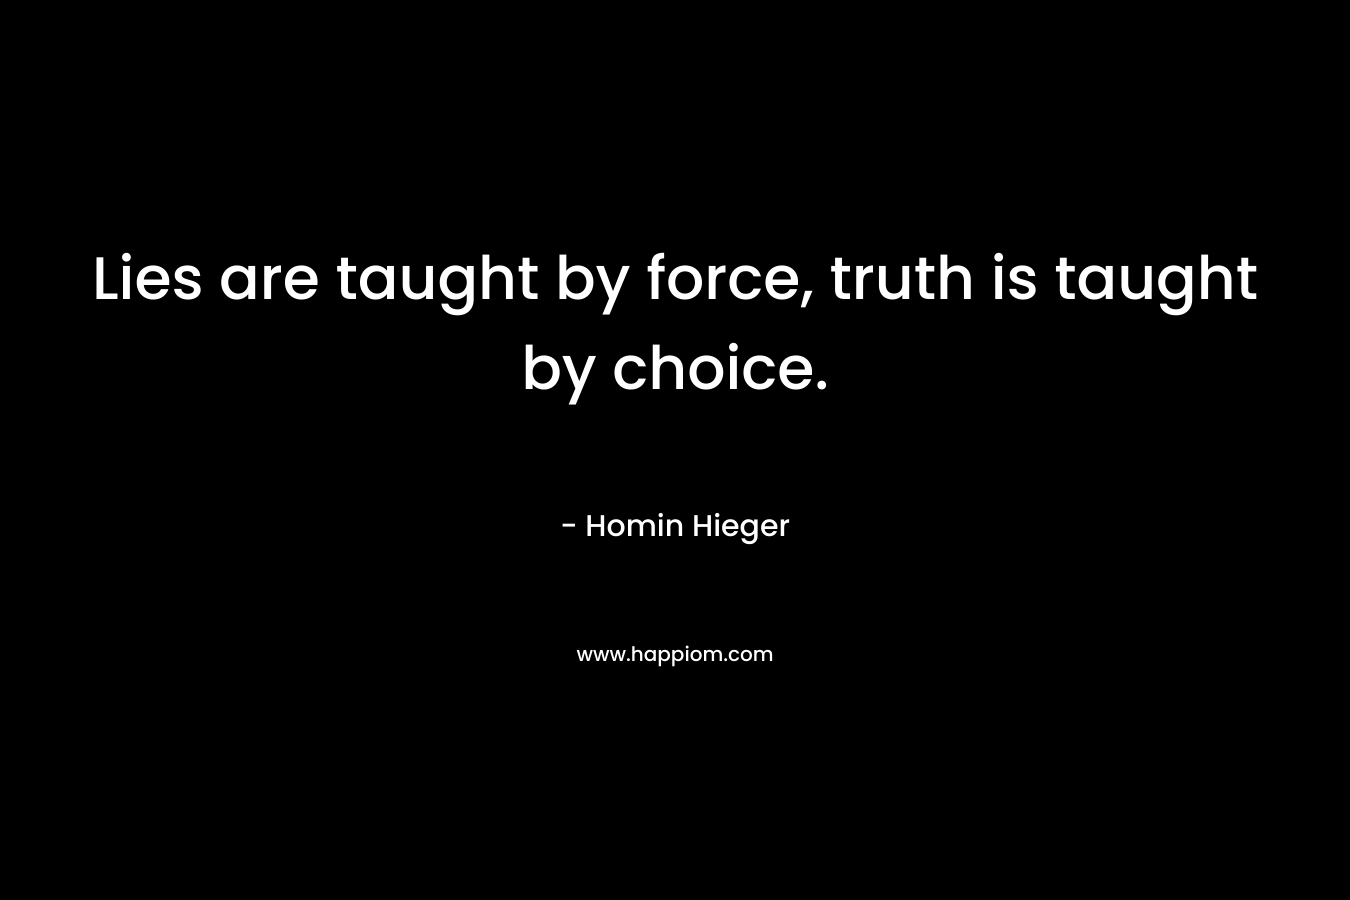 Lies are taught by force, truth is taught by choice.